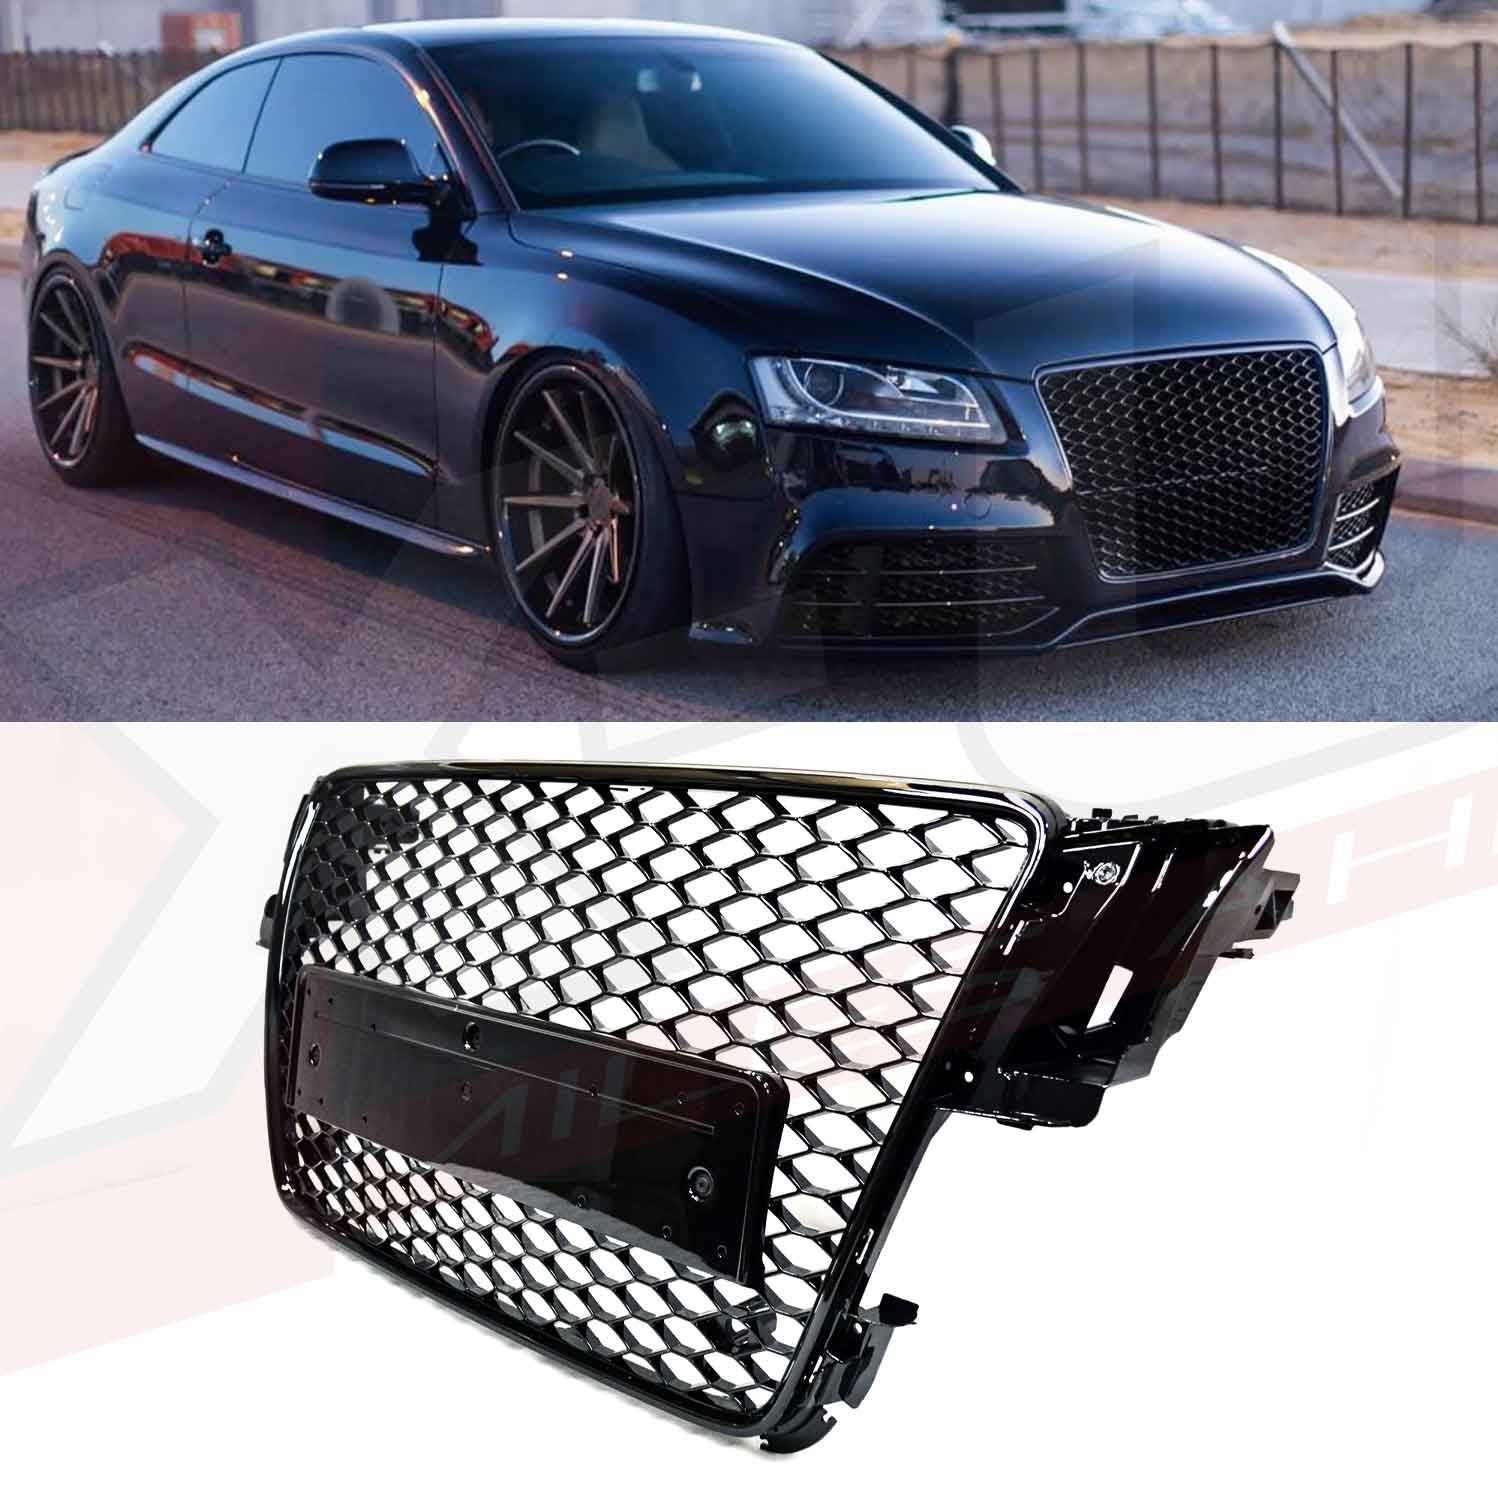 Ejeren Læne Enhed Audi A5 S5 2007-2012 B8 to RS5 style honeycomb mesh grill gloss black